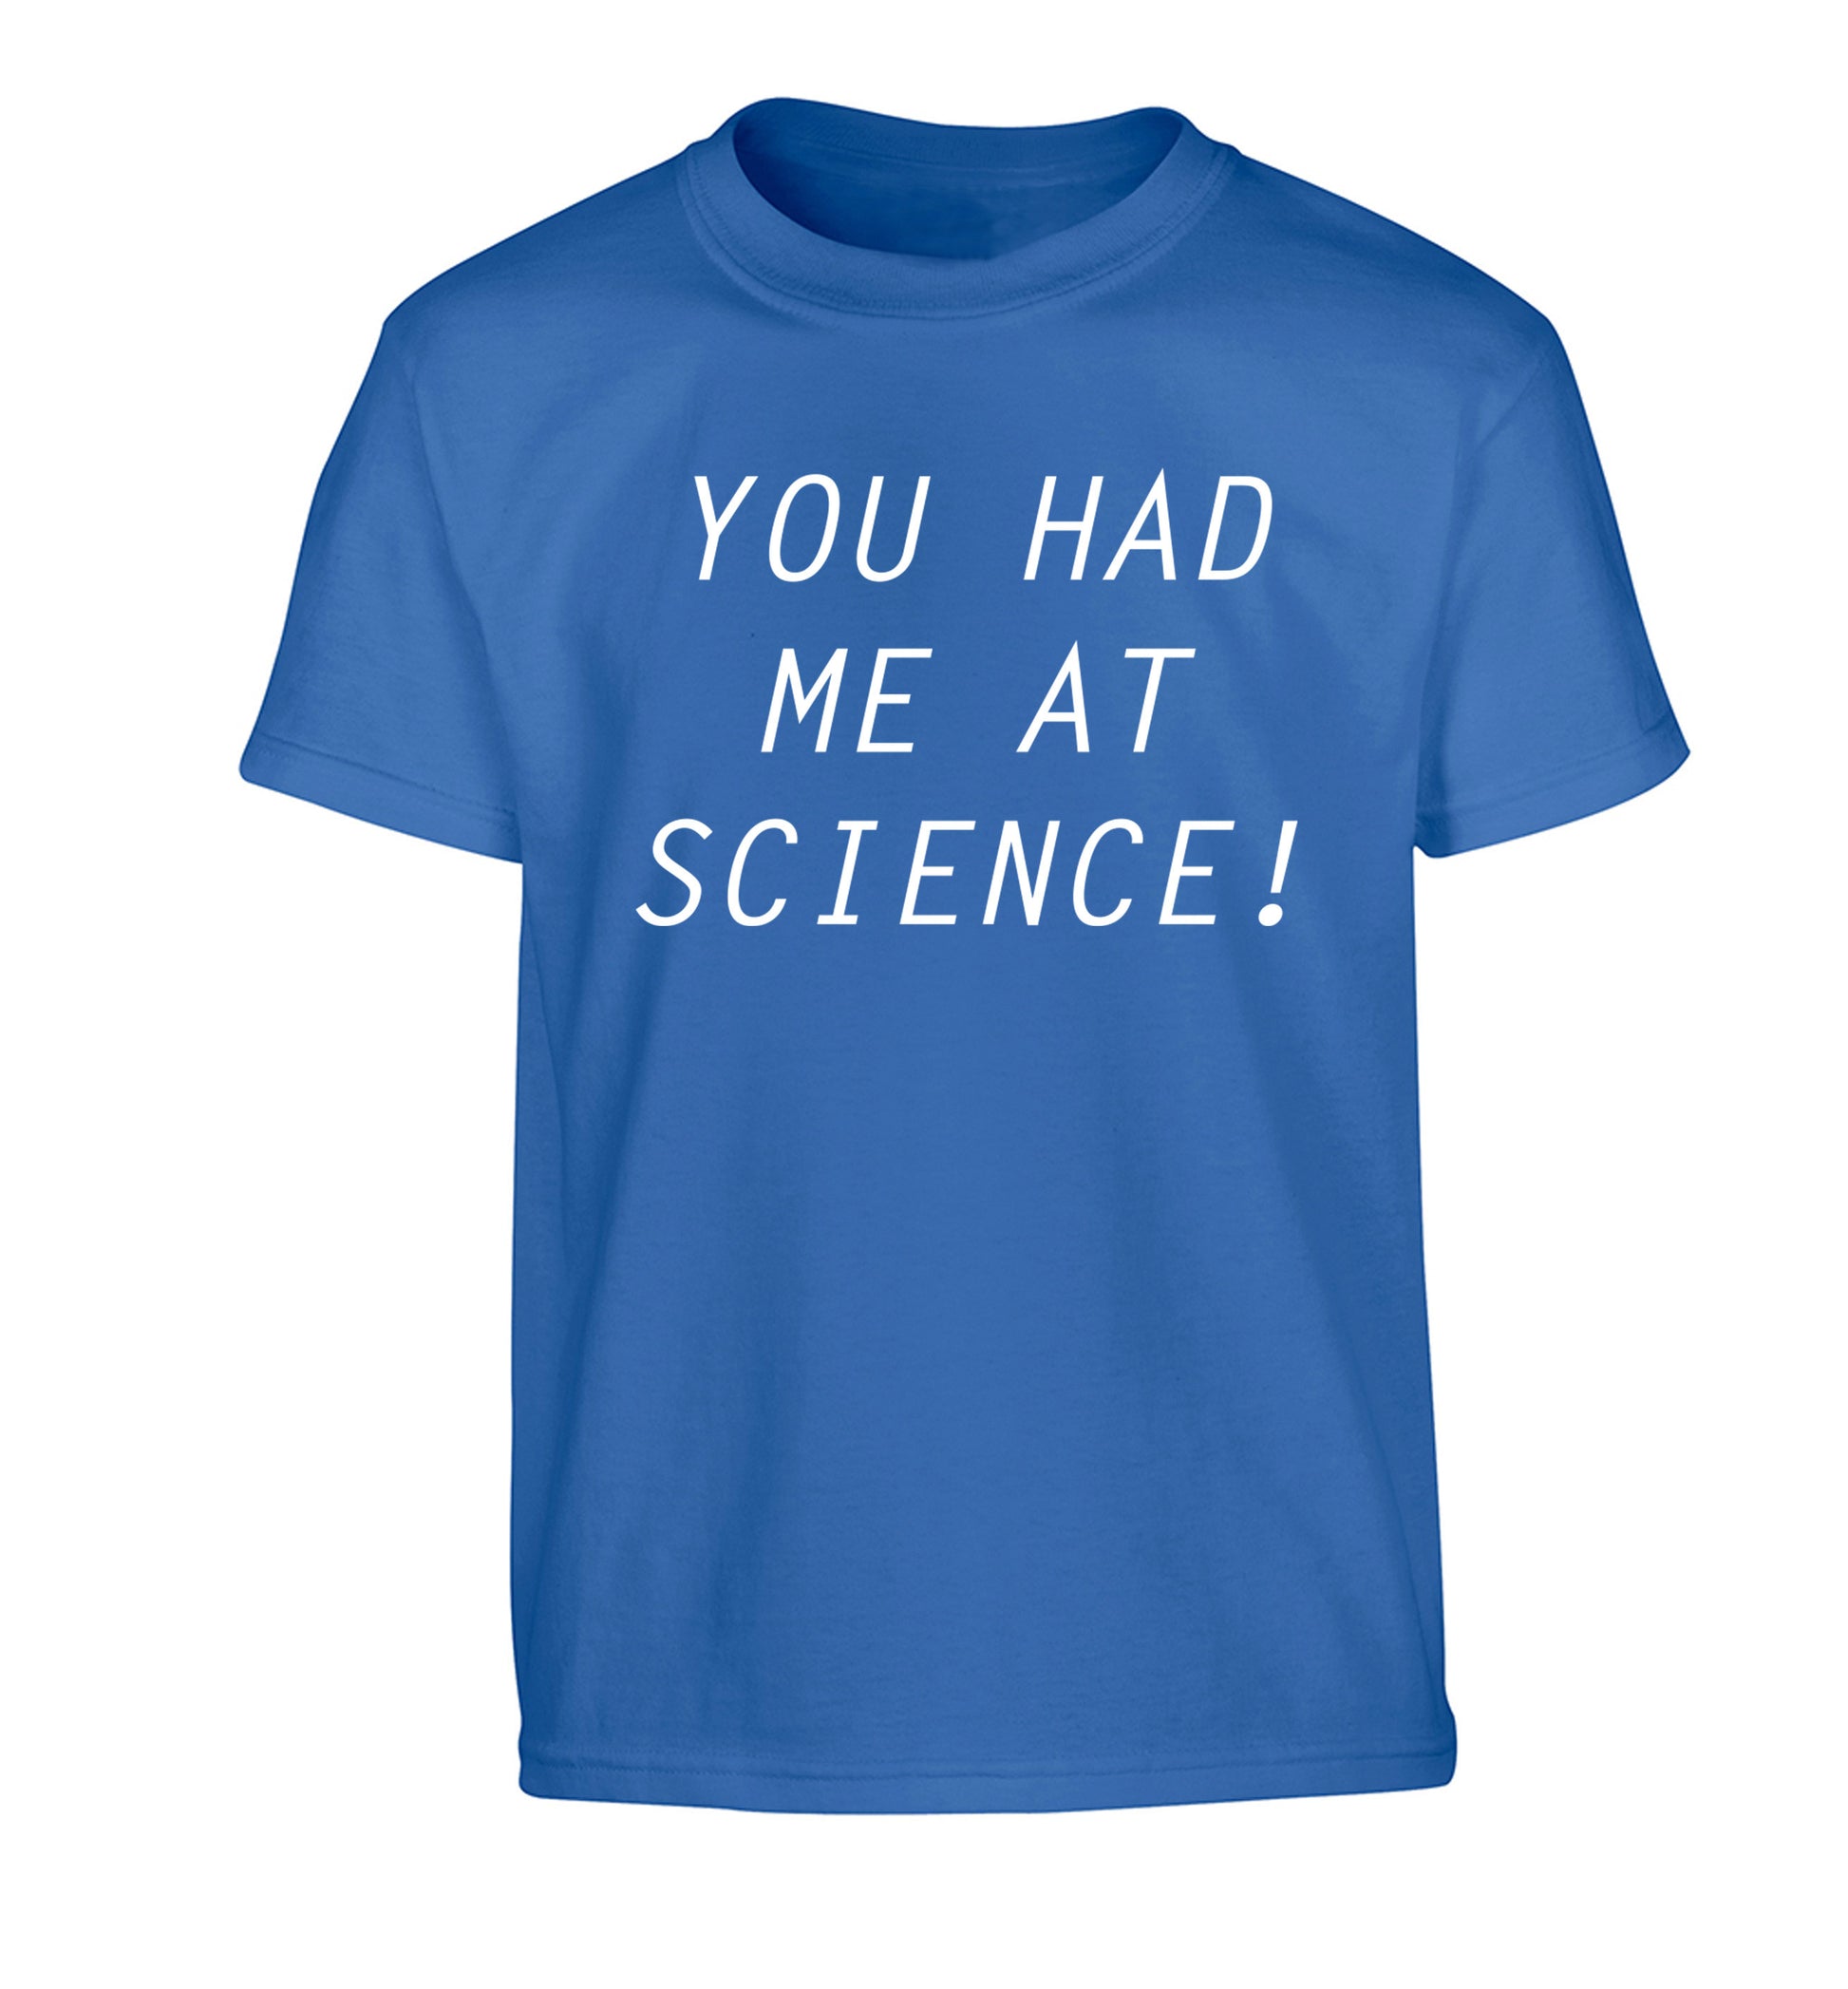 You had me at science Children's blue Tshirt 12-14 Years